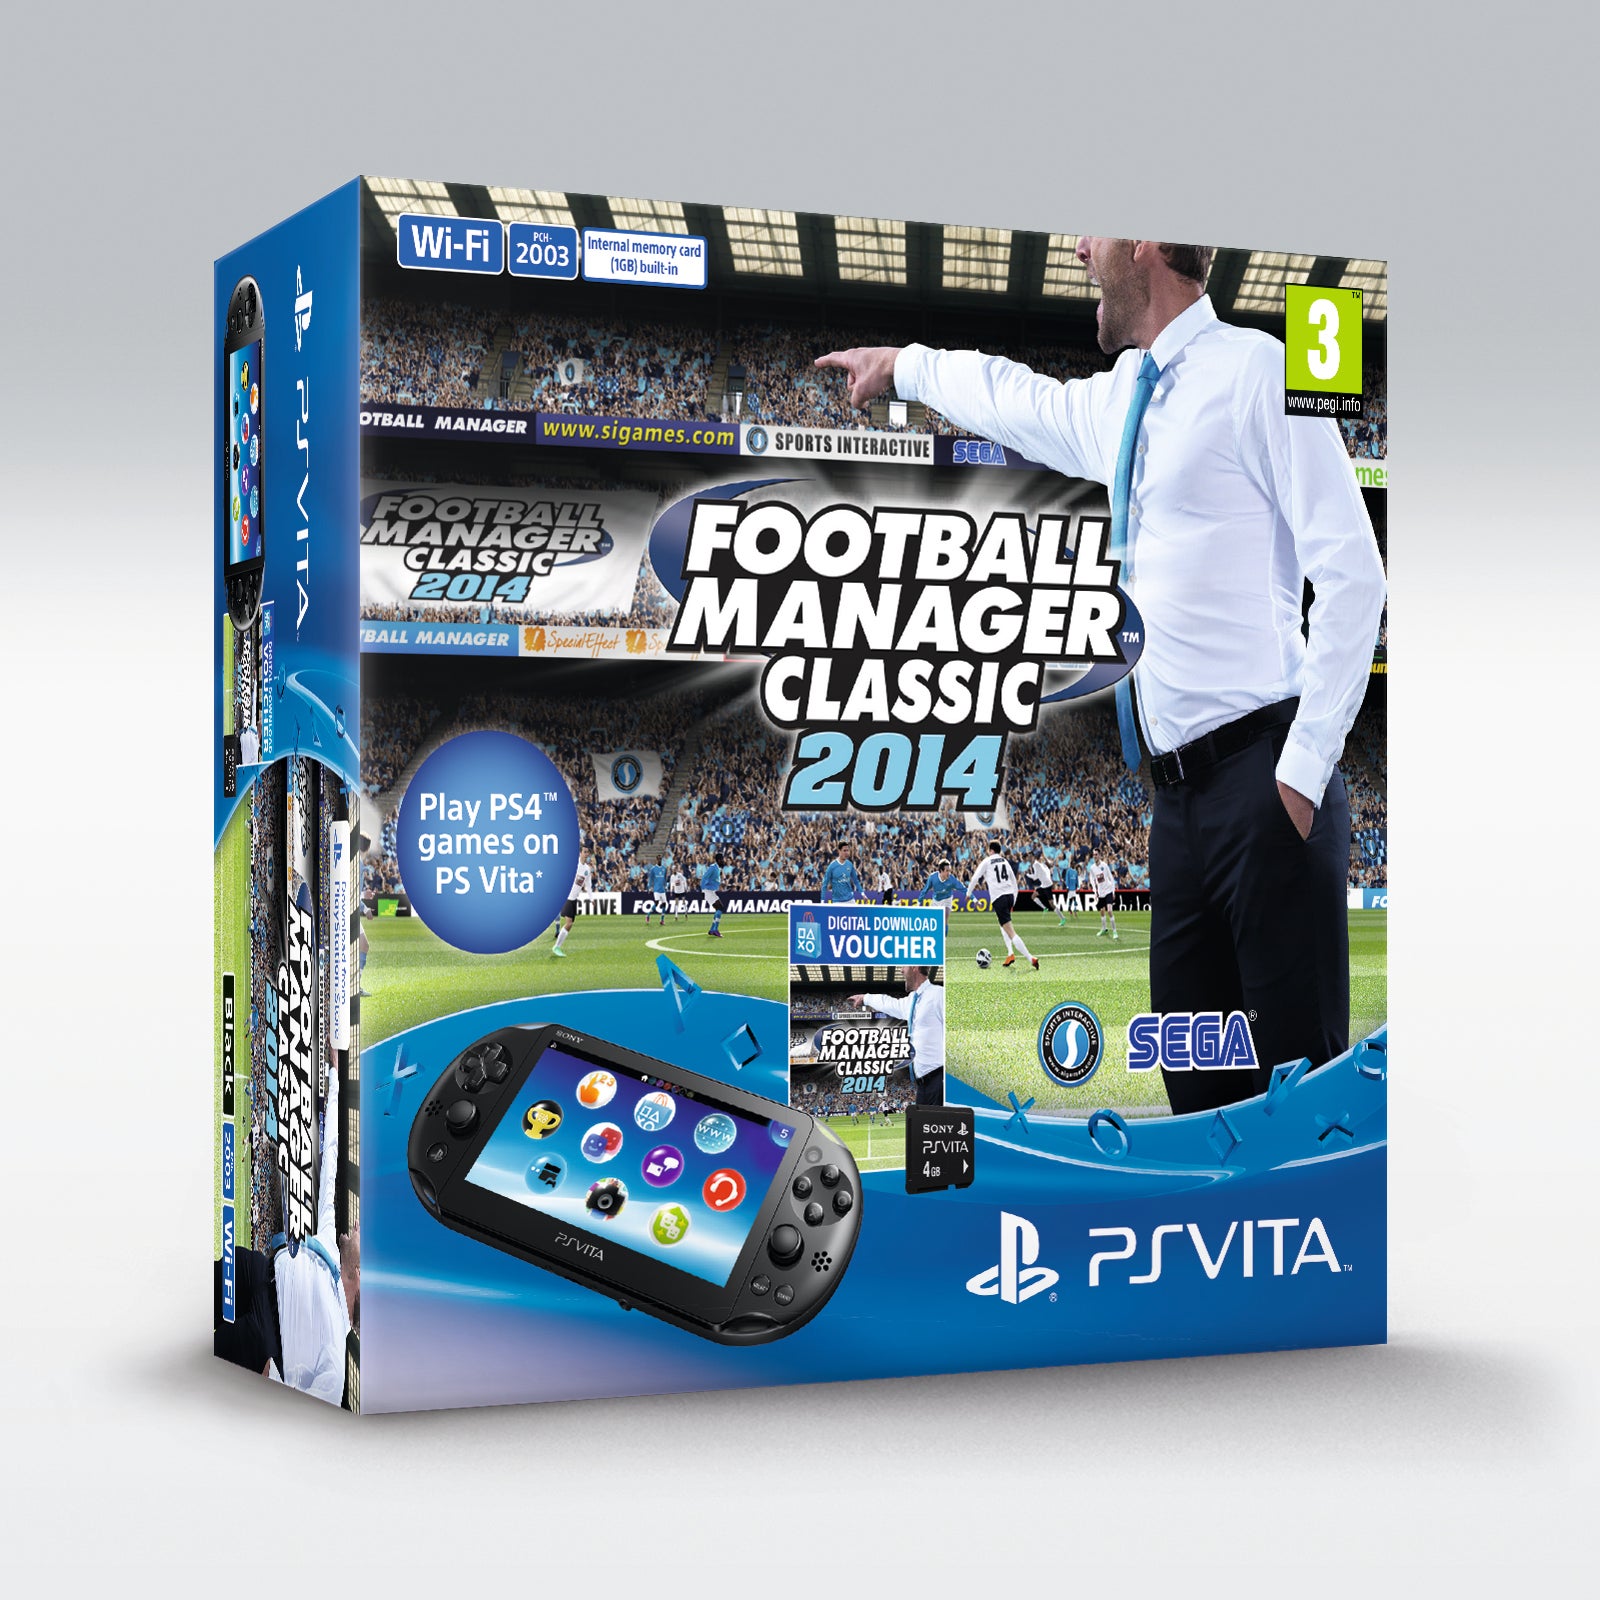 Football Manager Classic 2014 PS console bundle announced, out April 17 | VG247